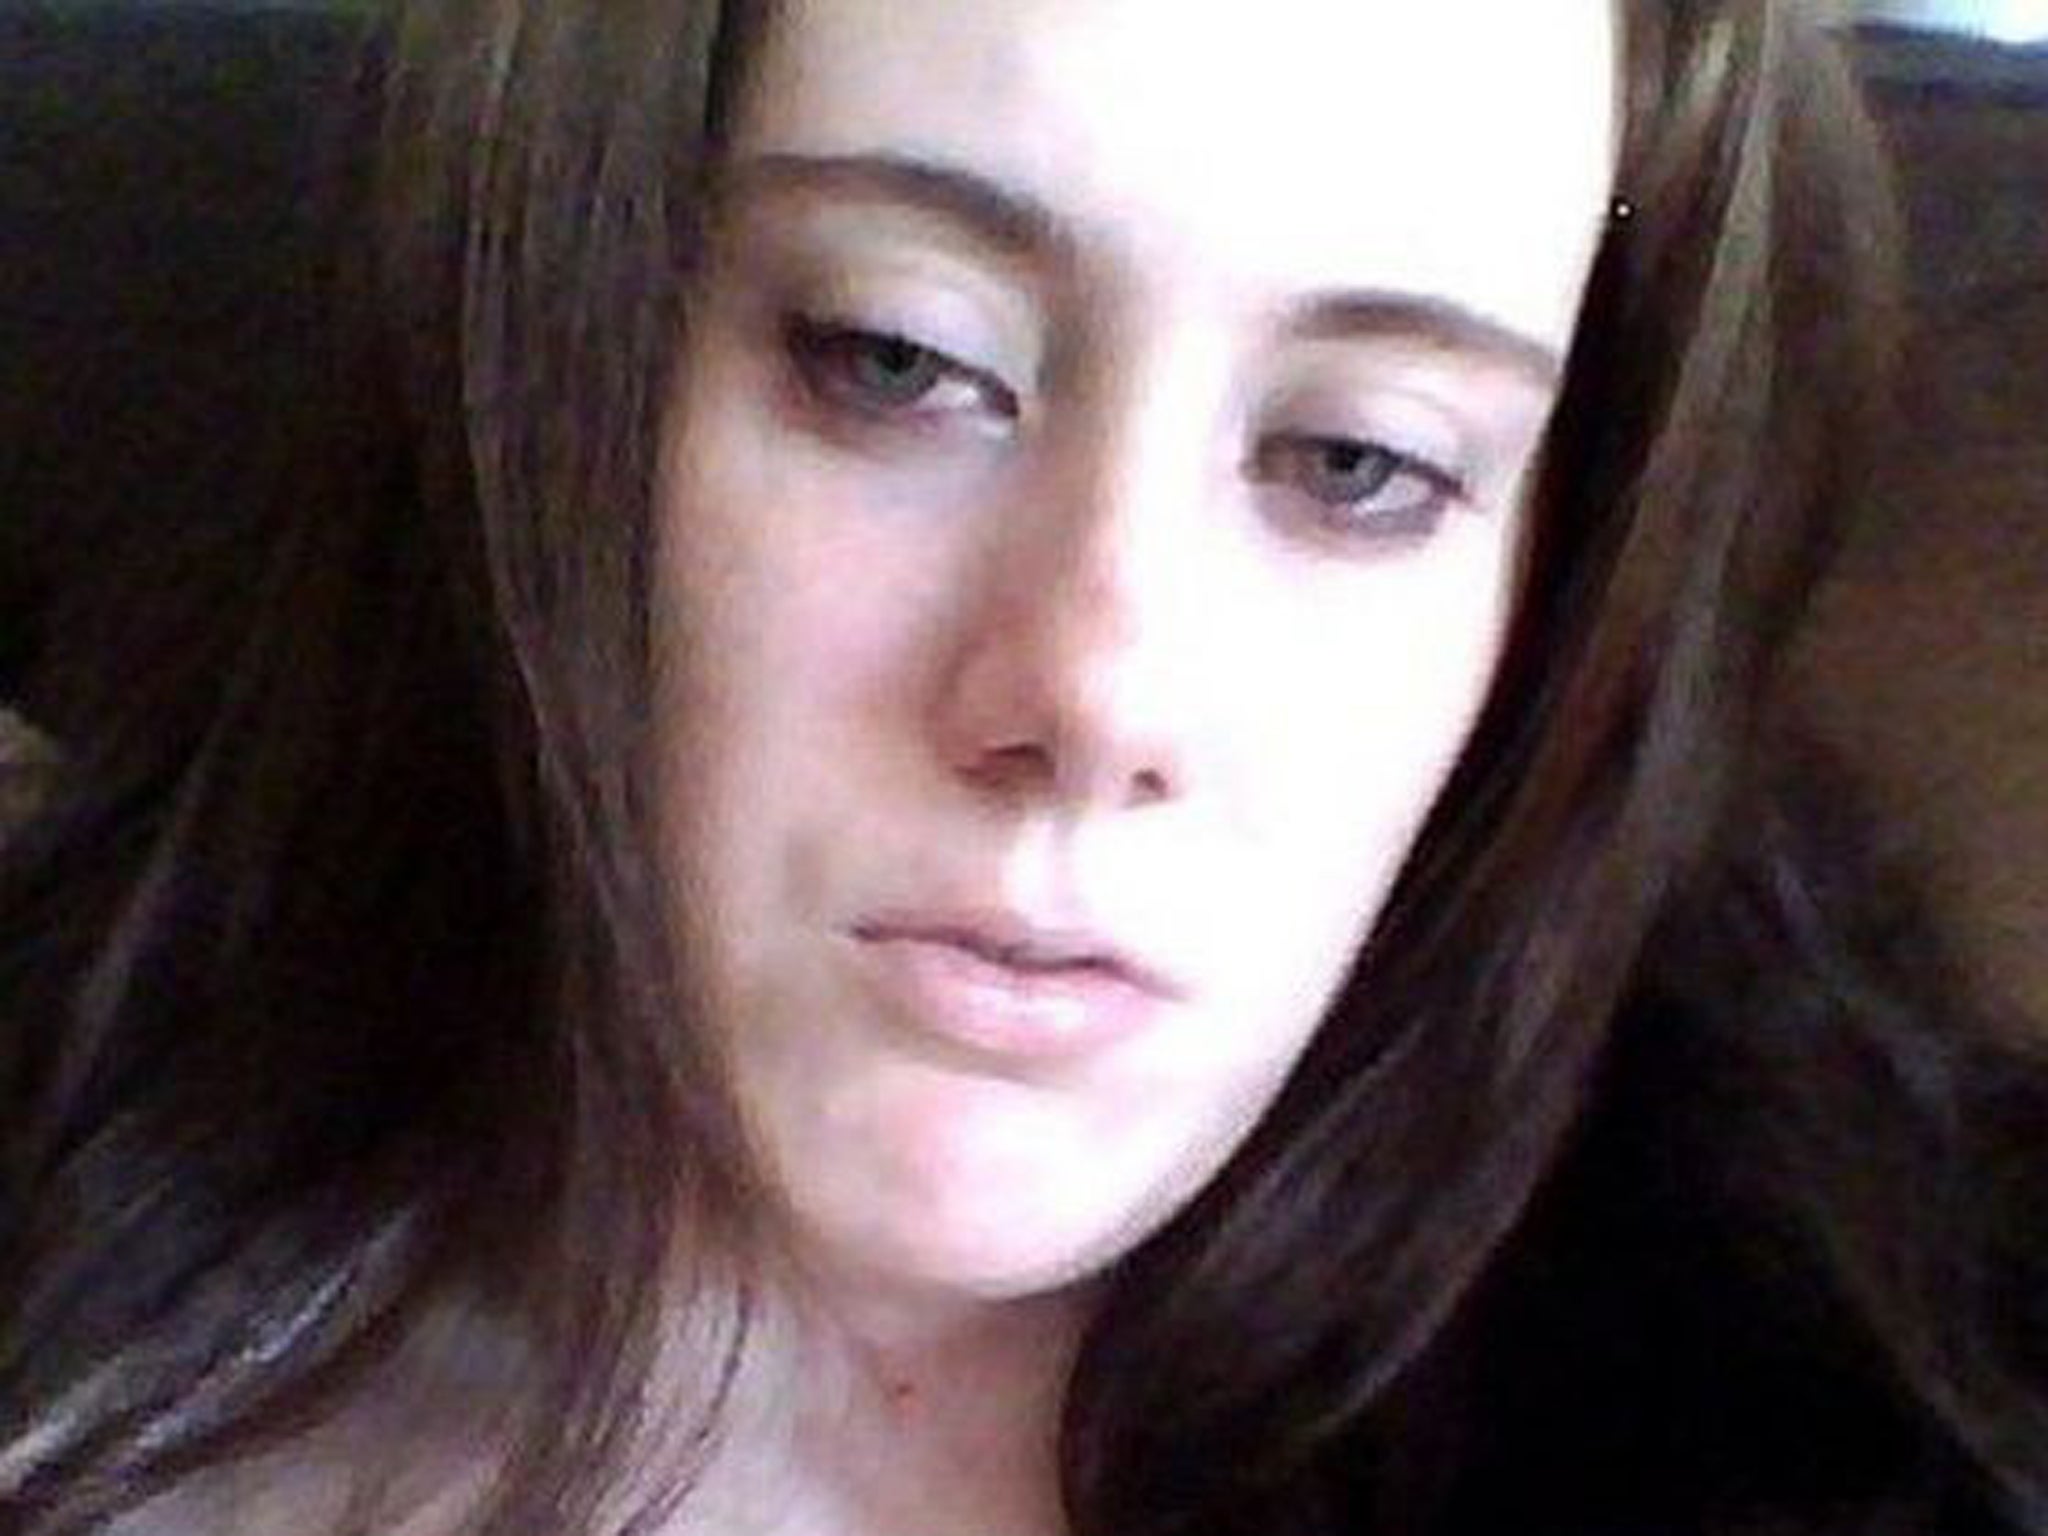 Samantha Lewthwaite, whose husband Jermaine Lindsay was one of the 7/7 suicide bombers in London